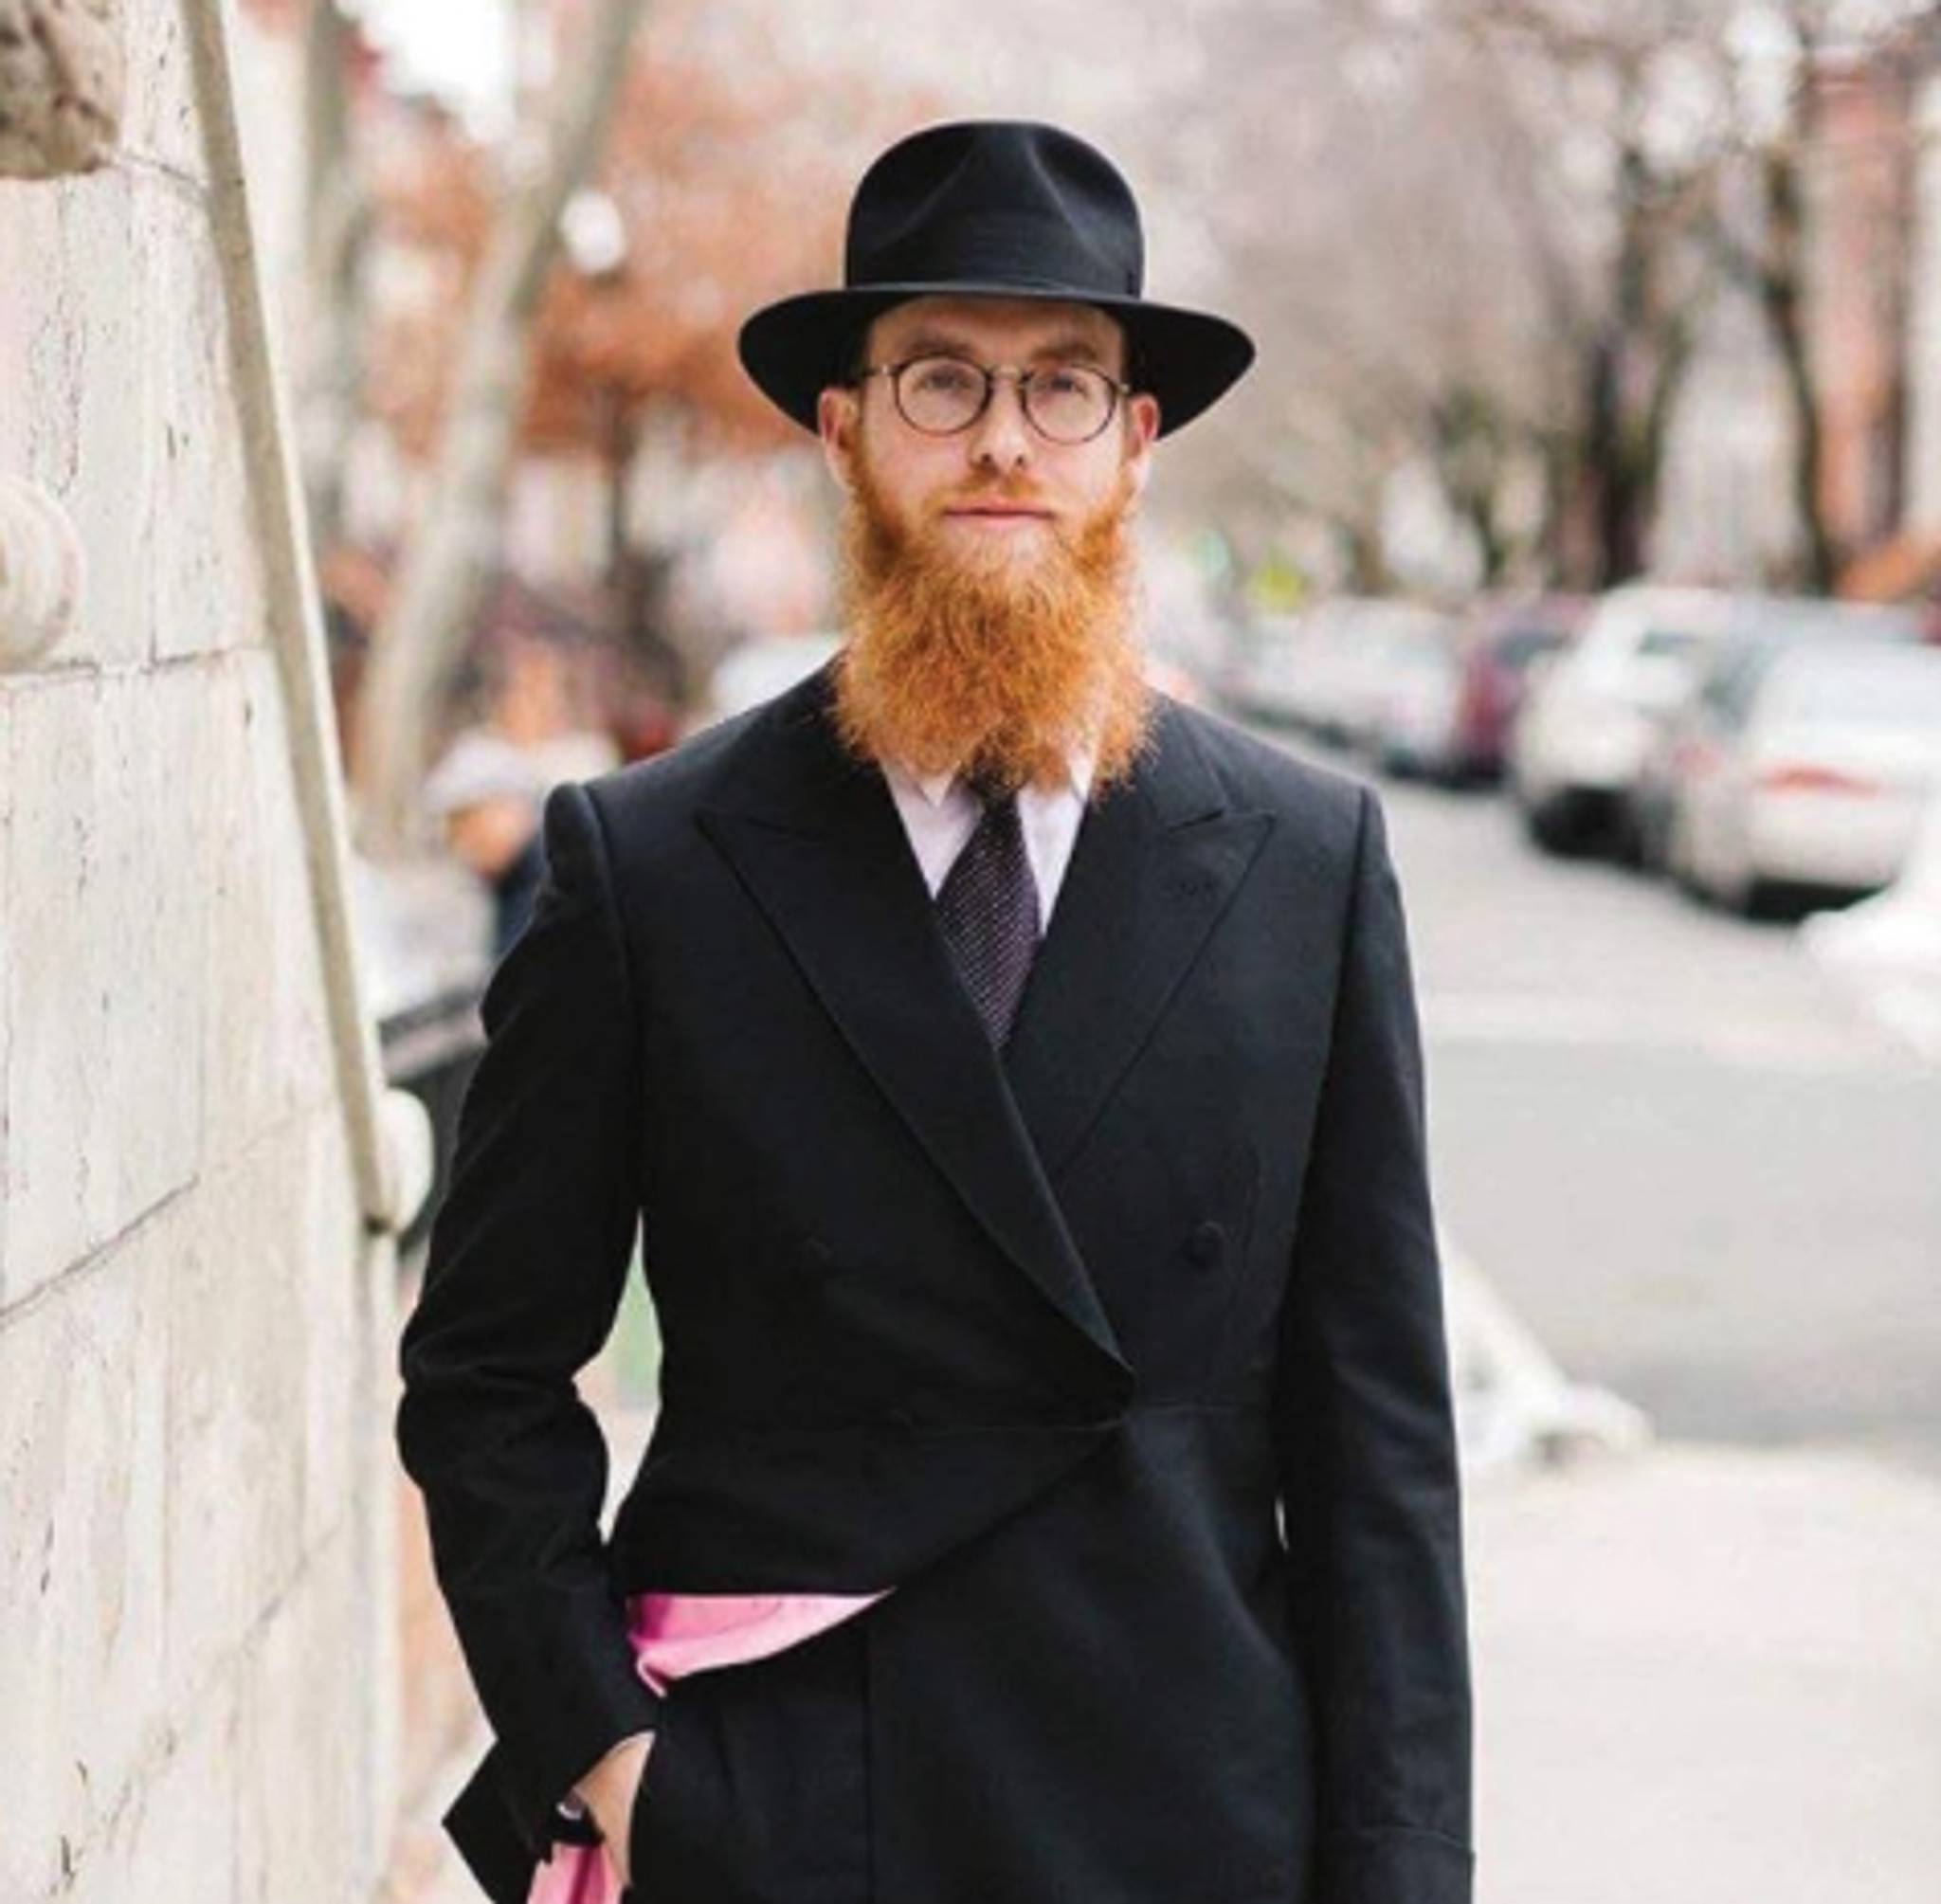 Ultra-Orthodox Jews mix fashion with conservatism